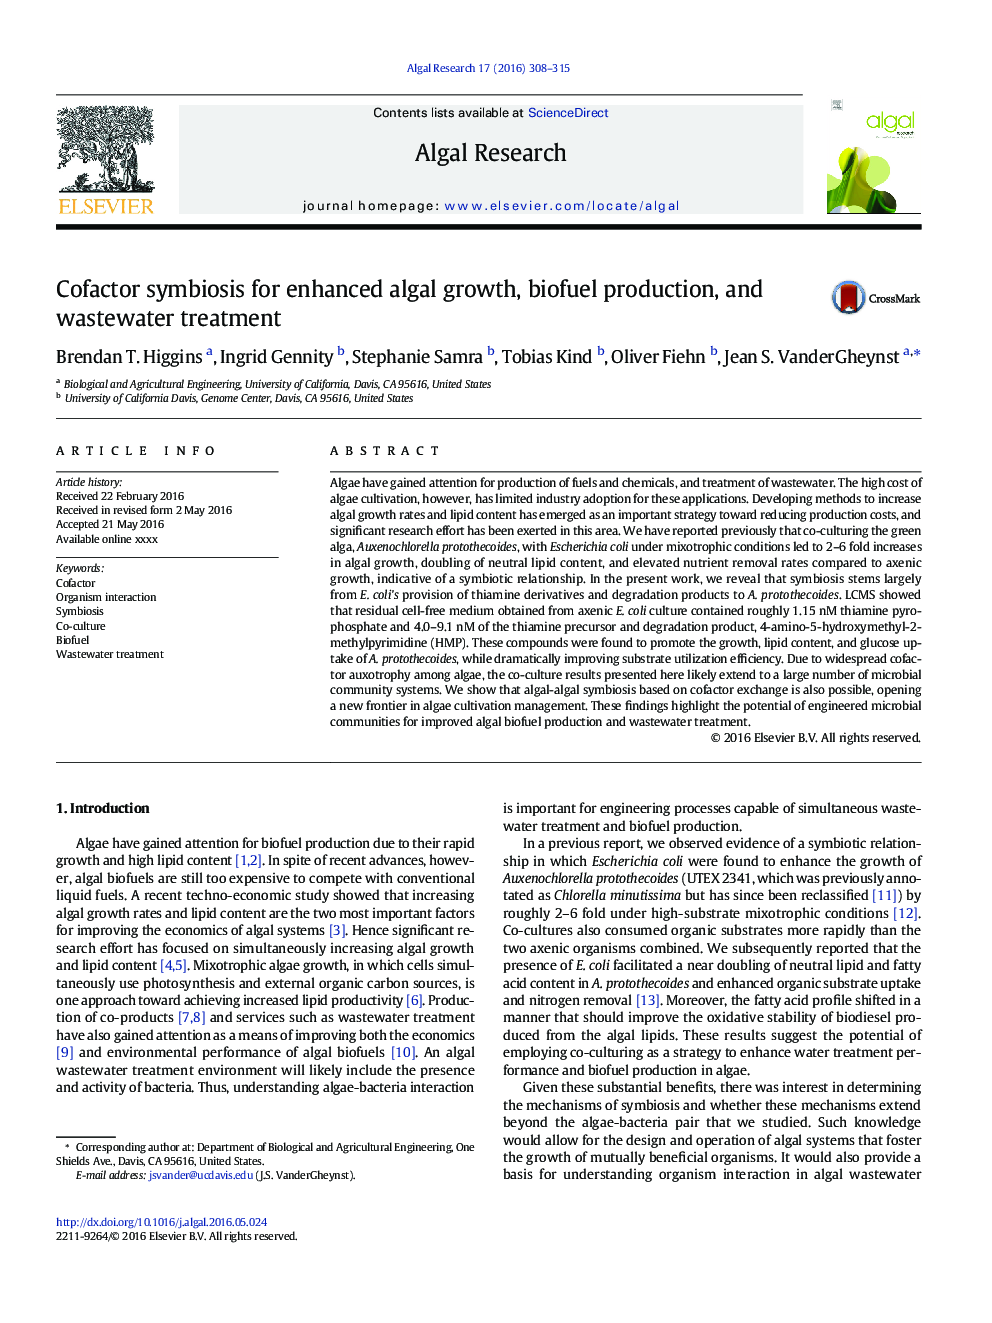 Cofactor symbiosis for enhanced algal growth, biofuel production, and wastewater treatment